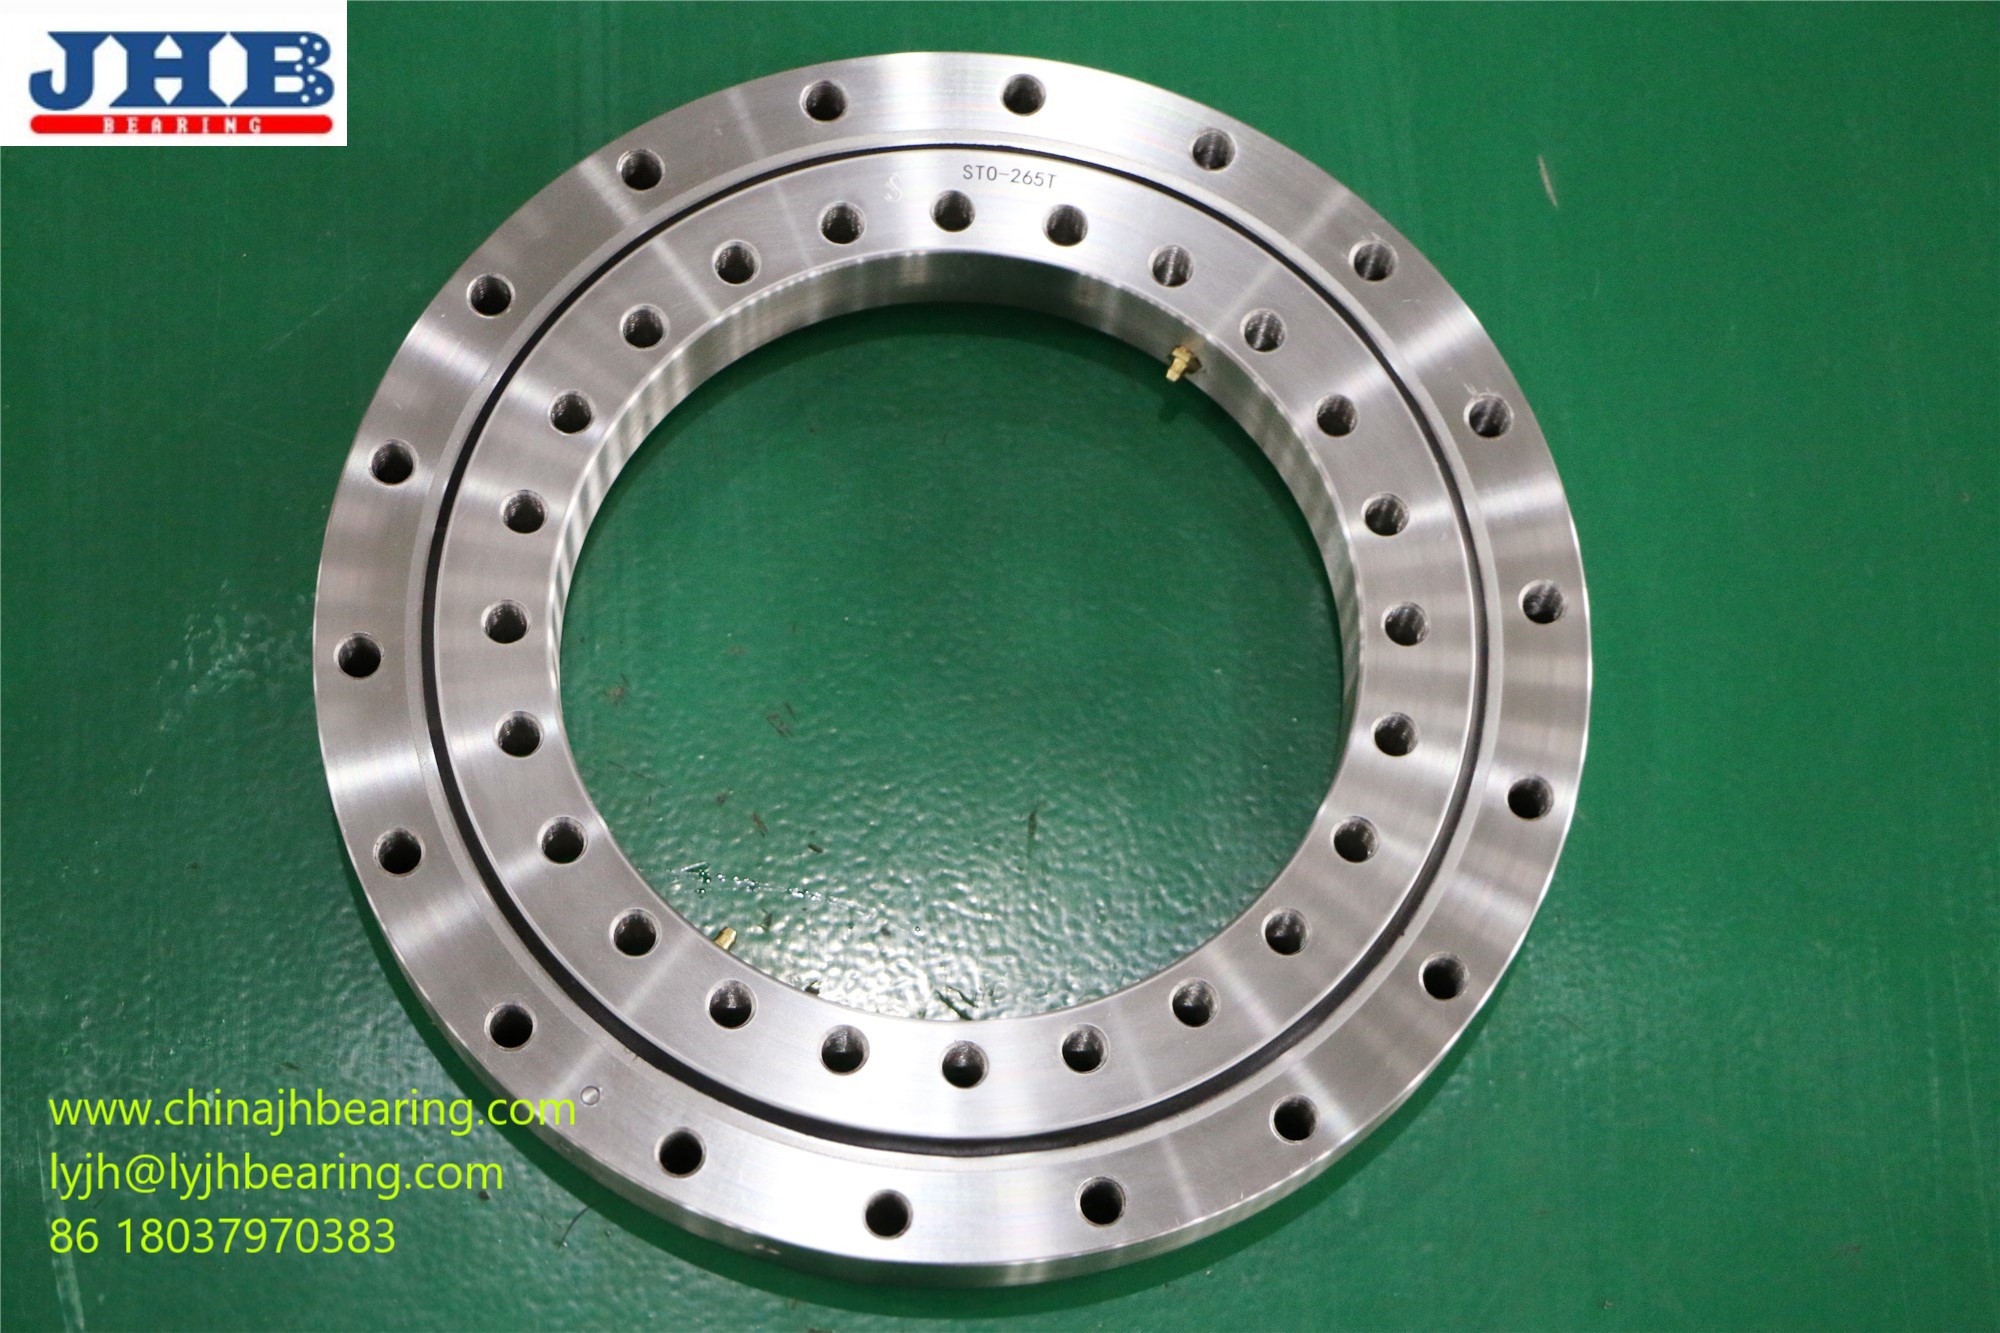 slewing ring ball bearing RKS.23 0841 size 948X734X56mm no teeth for stackers  equipment